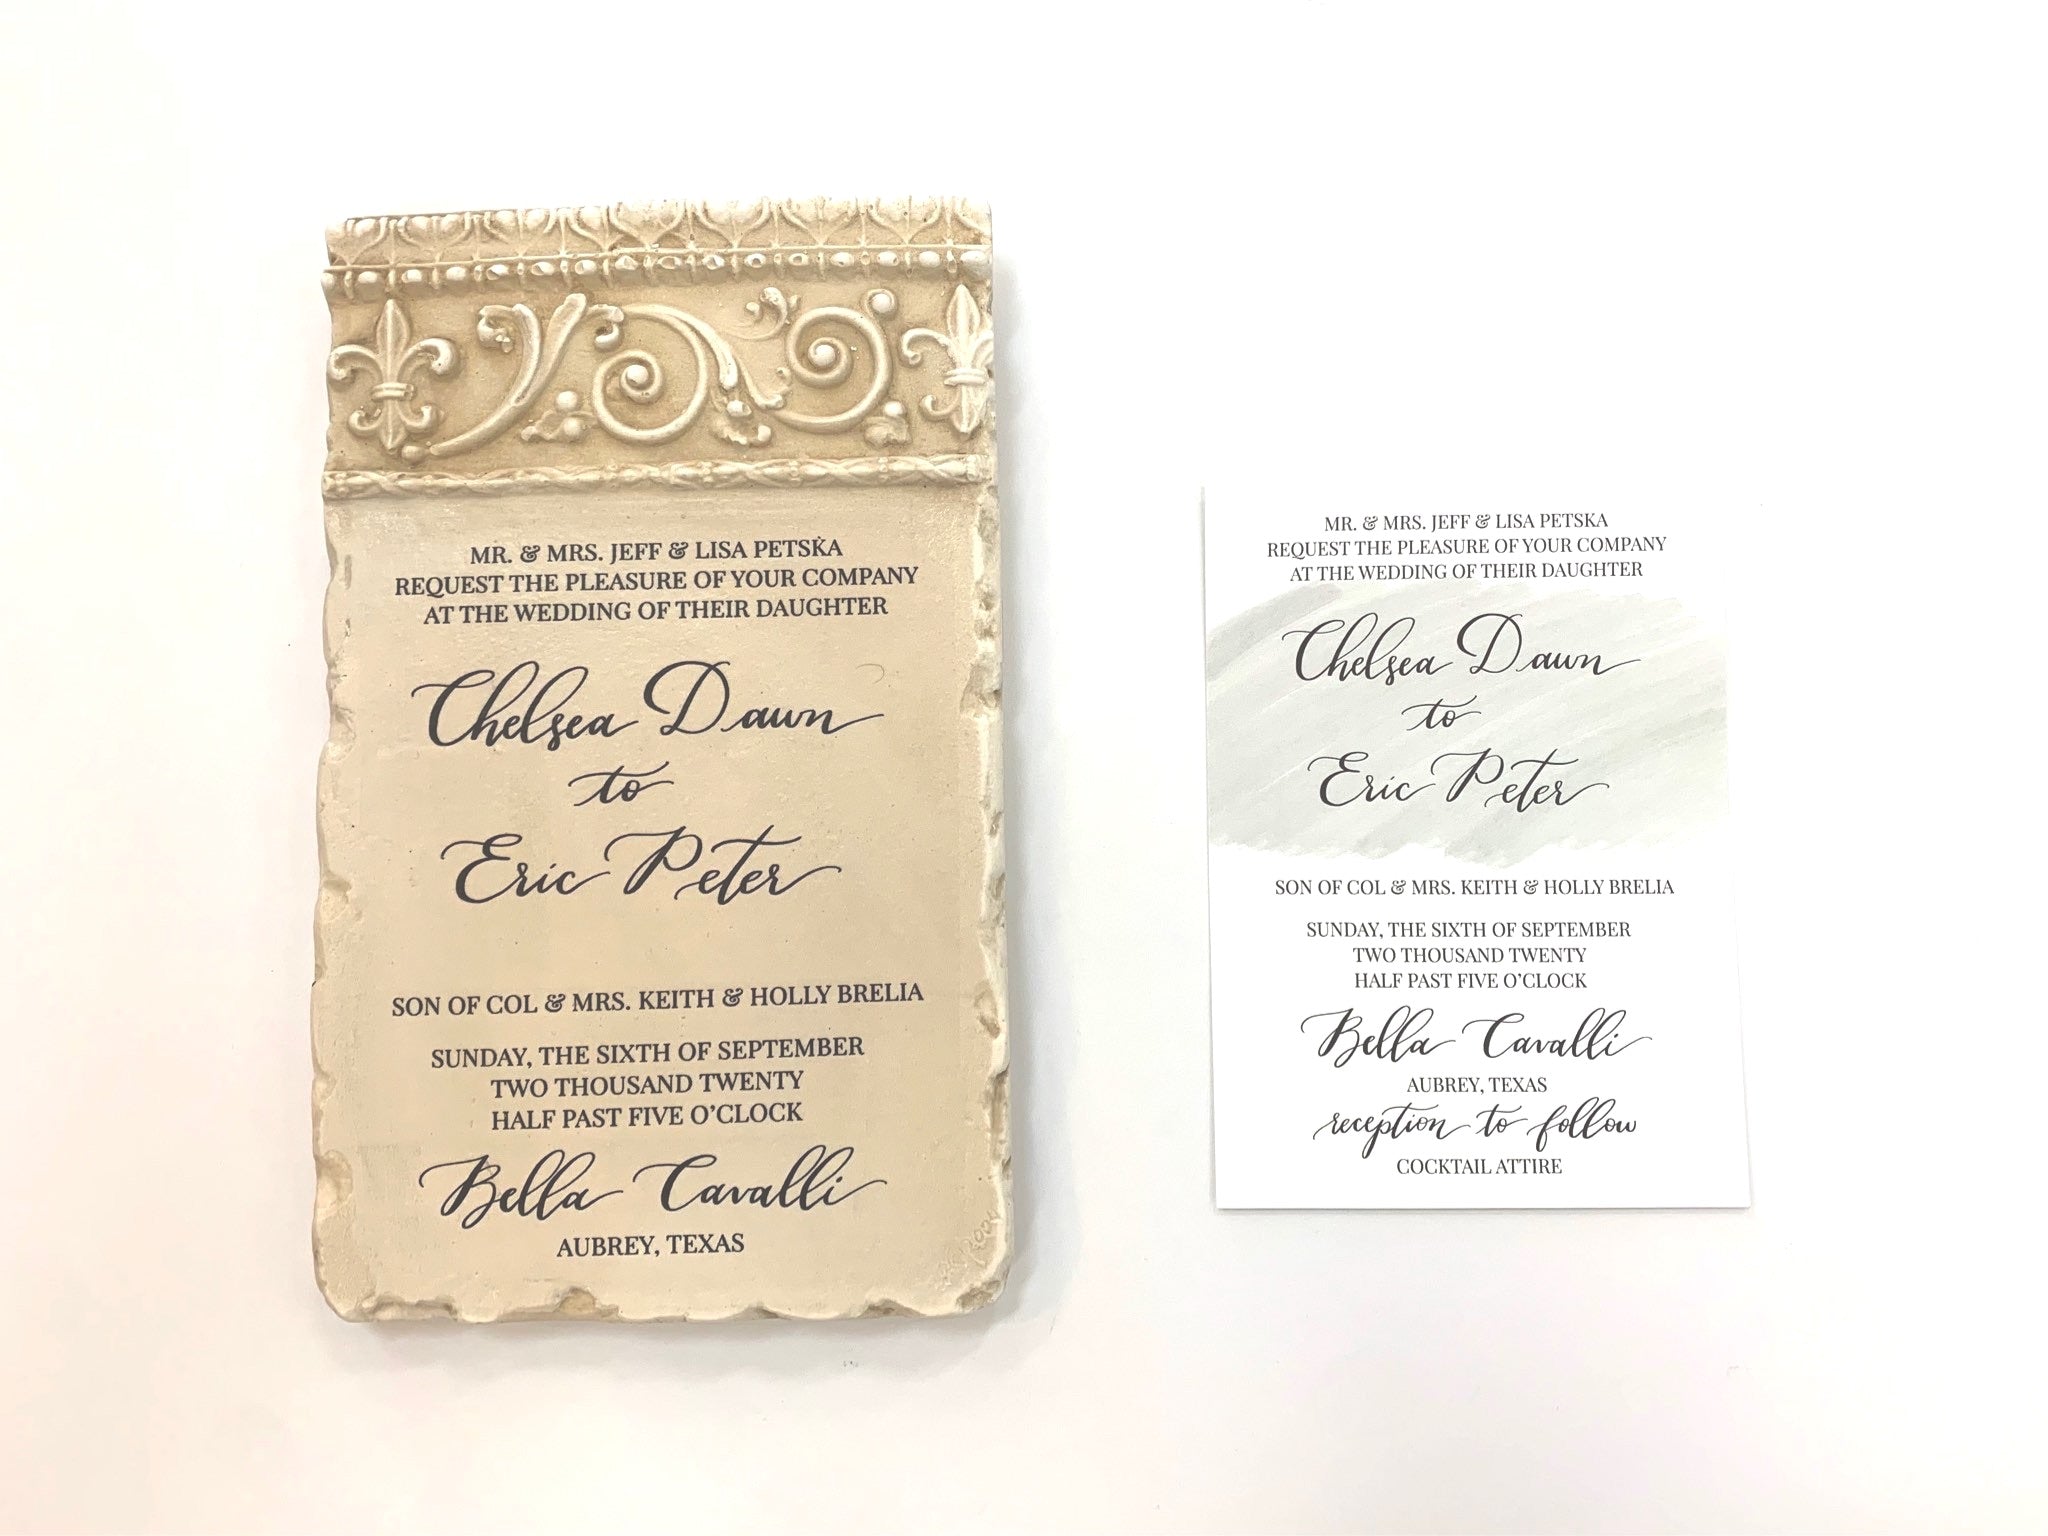 How To Ask Your Guests For Money Instead of Wedding Gifts – Motion Stamp